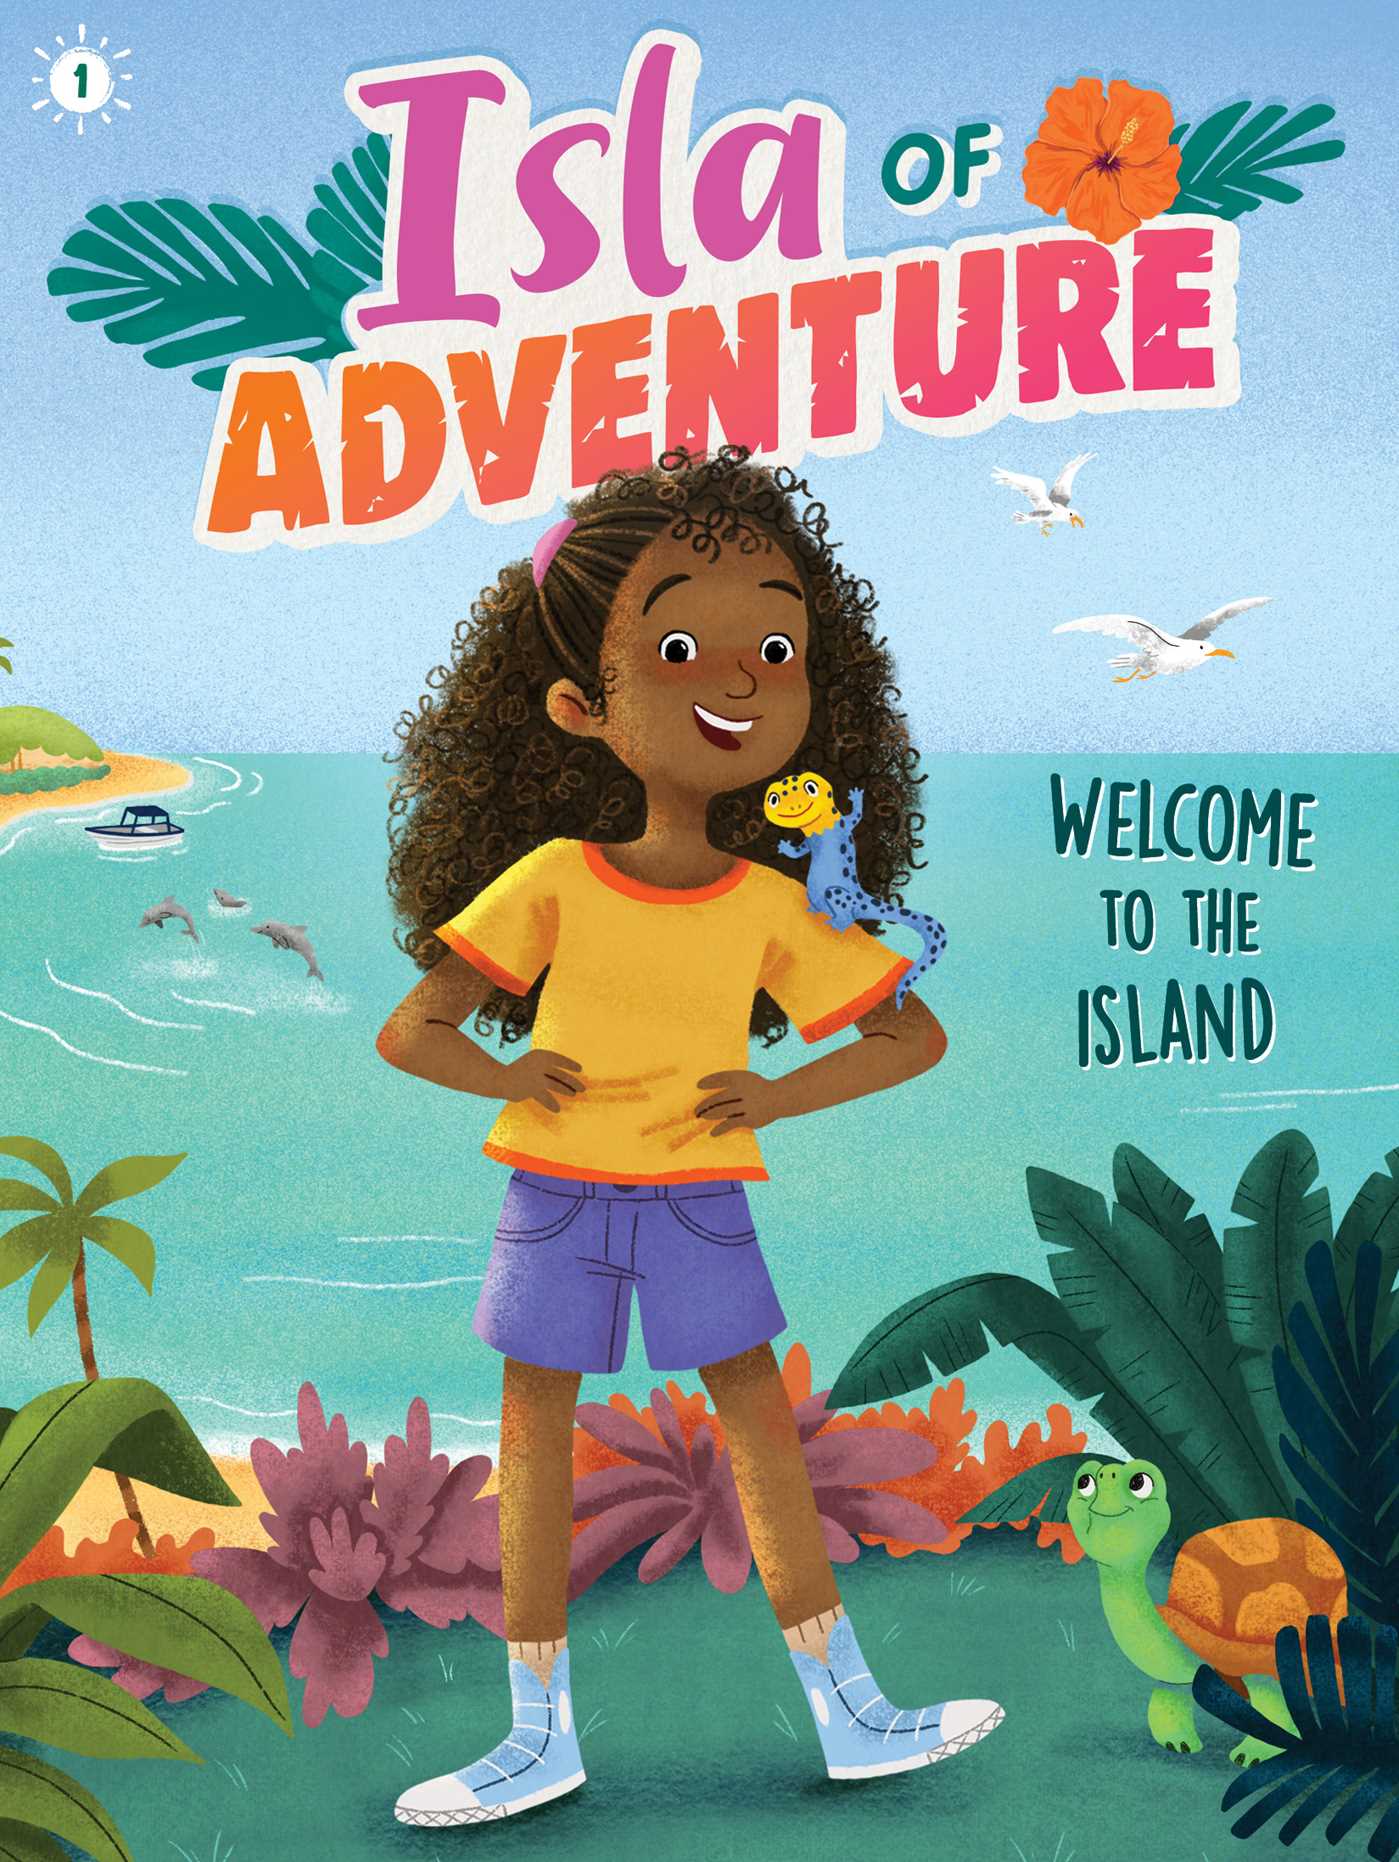 Image for "Welcome to the Island"